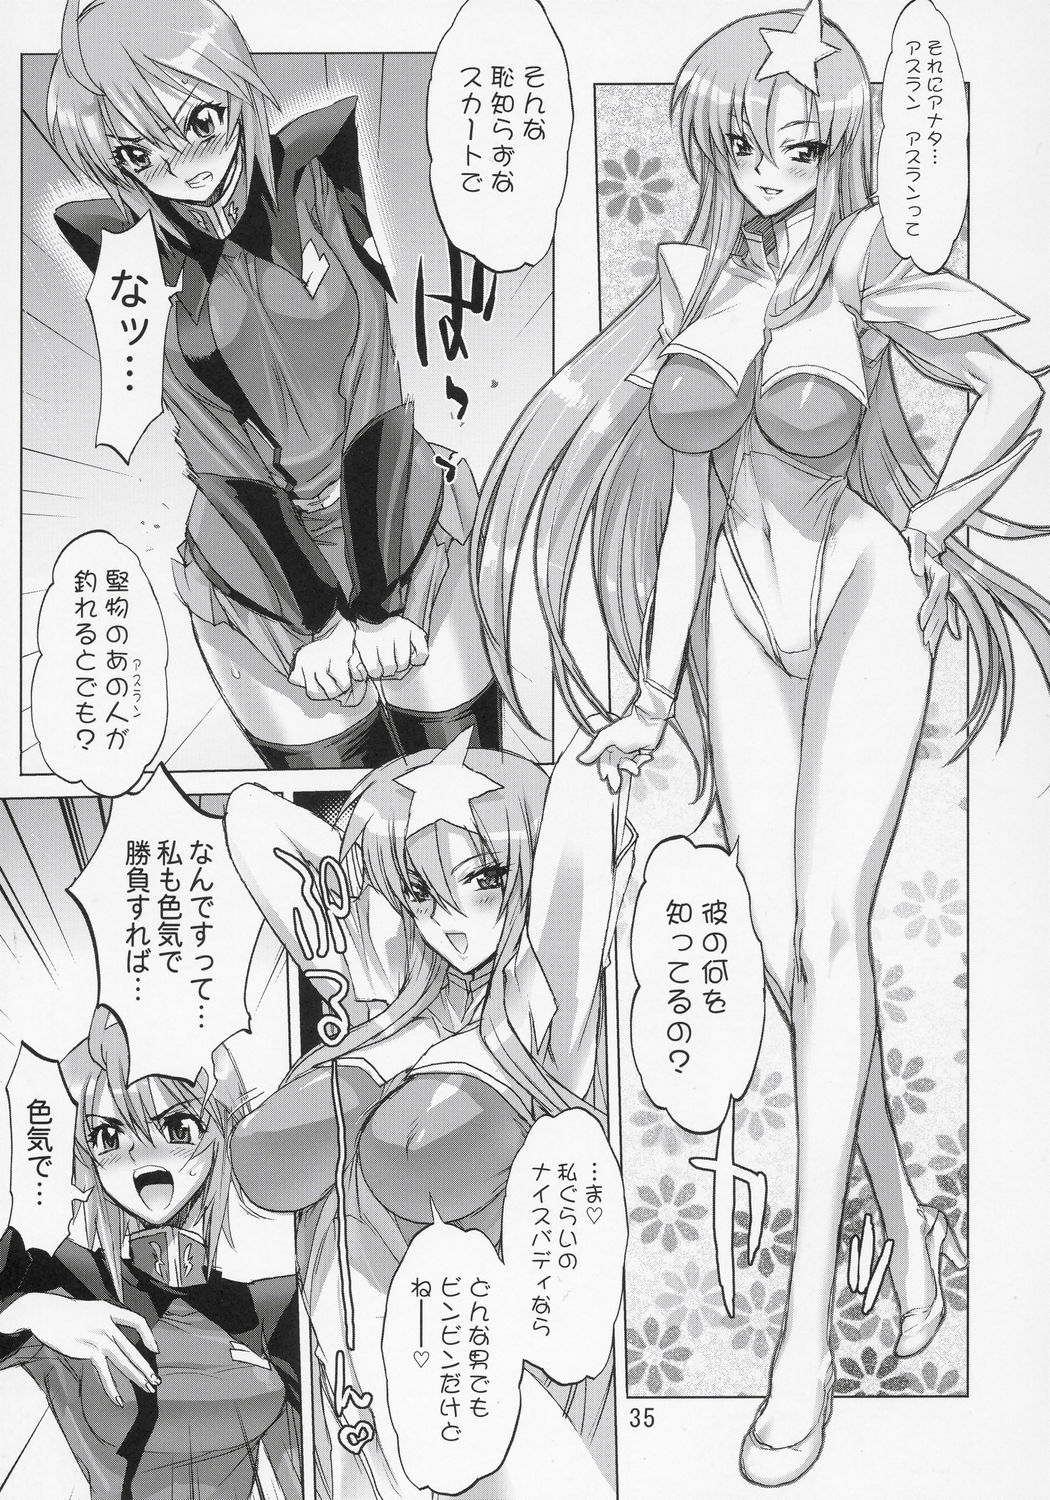 (C69) [Digital Accel Works] Inazuma Warrior 2 (Various) page 34 full